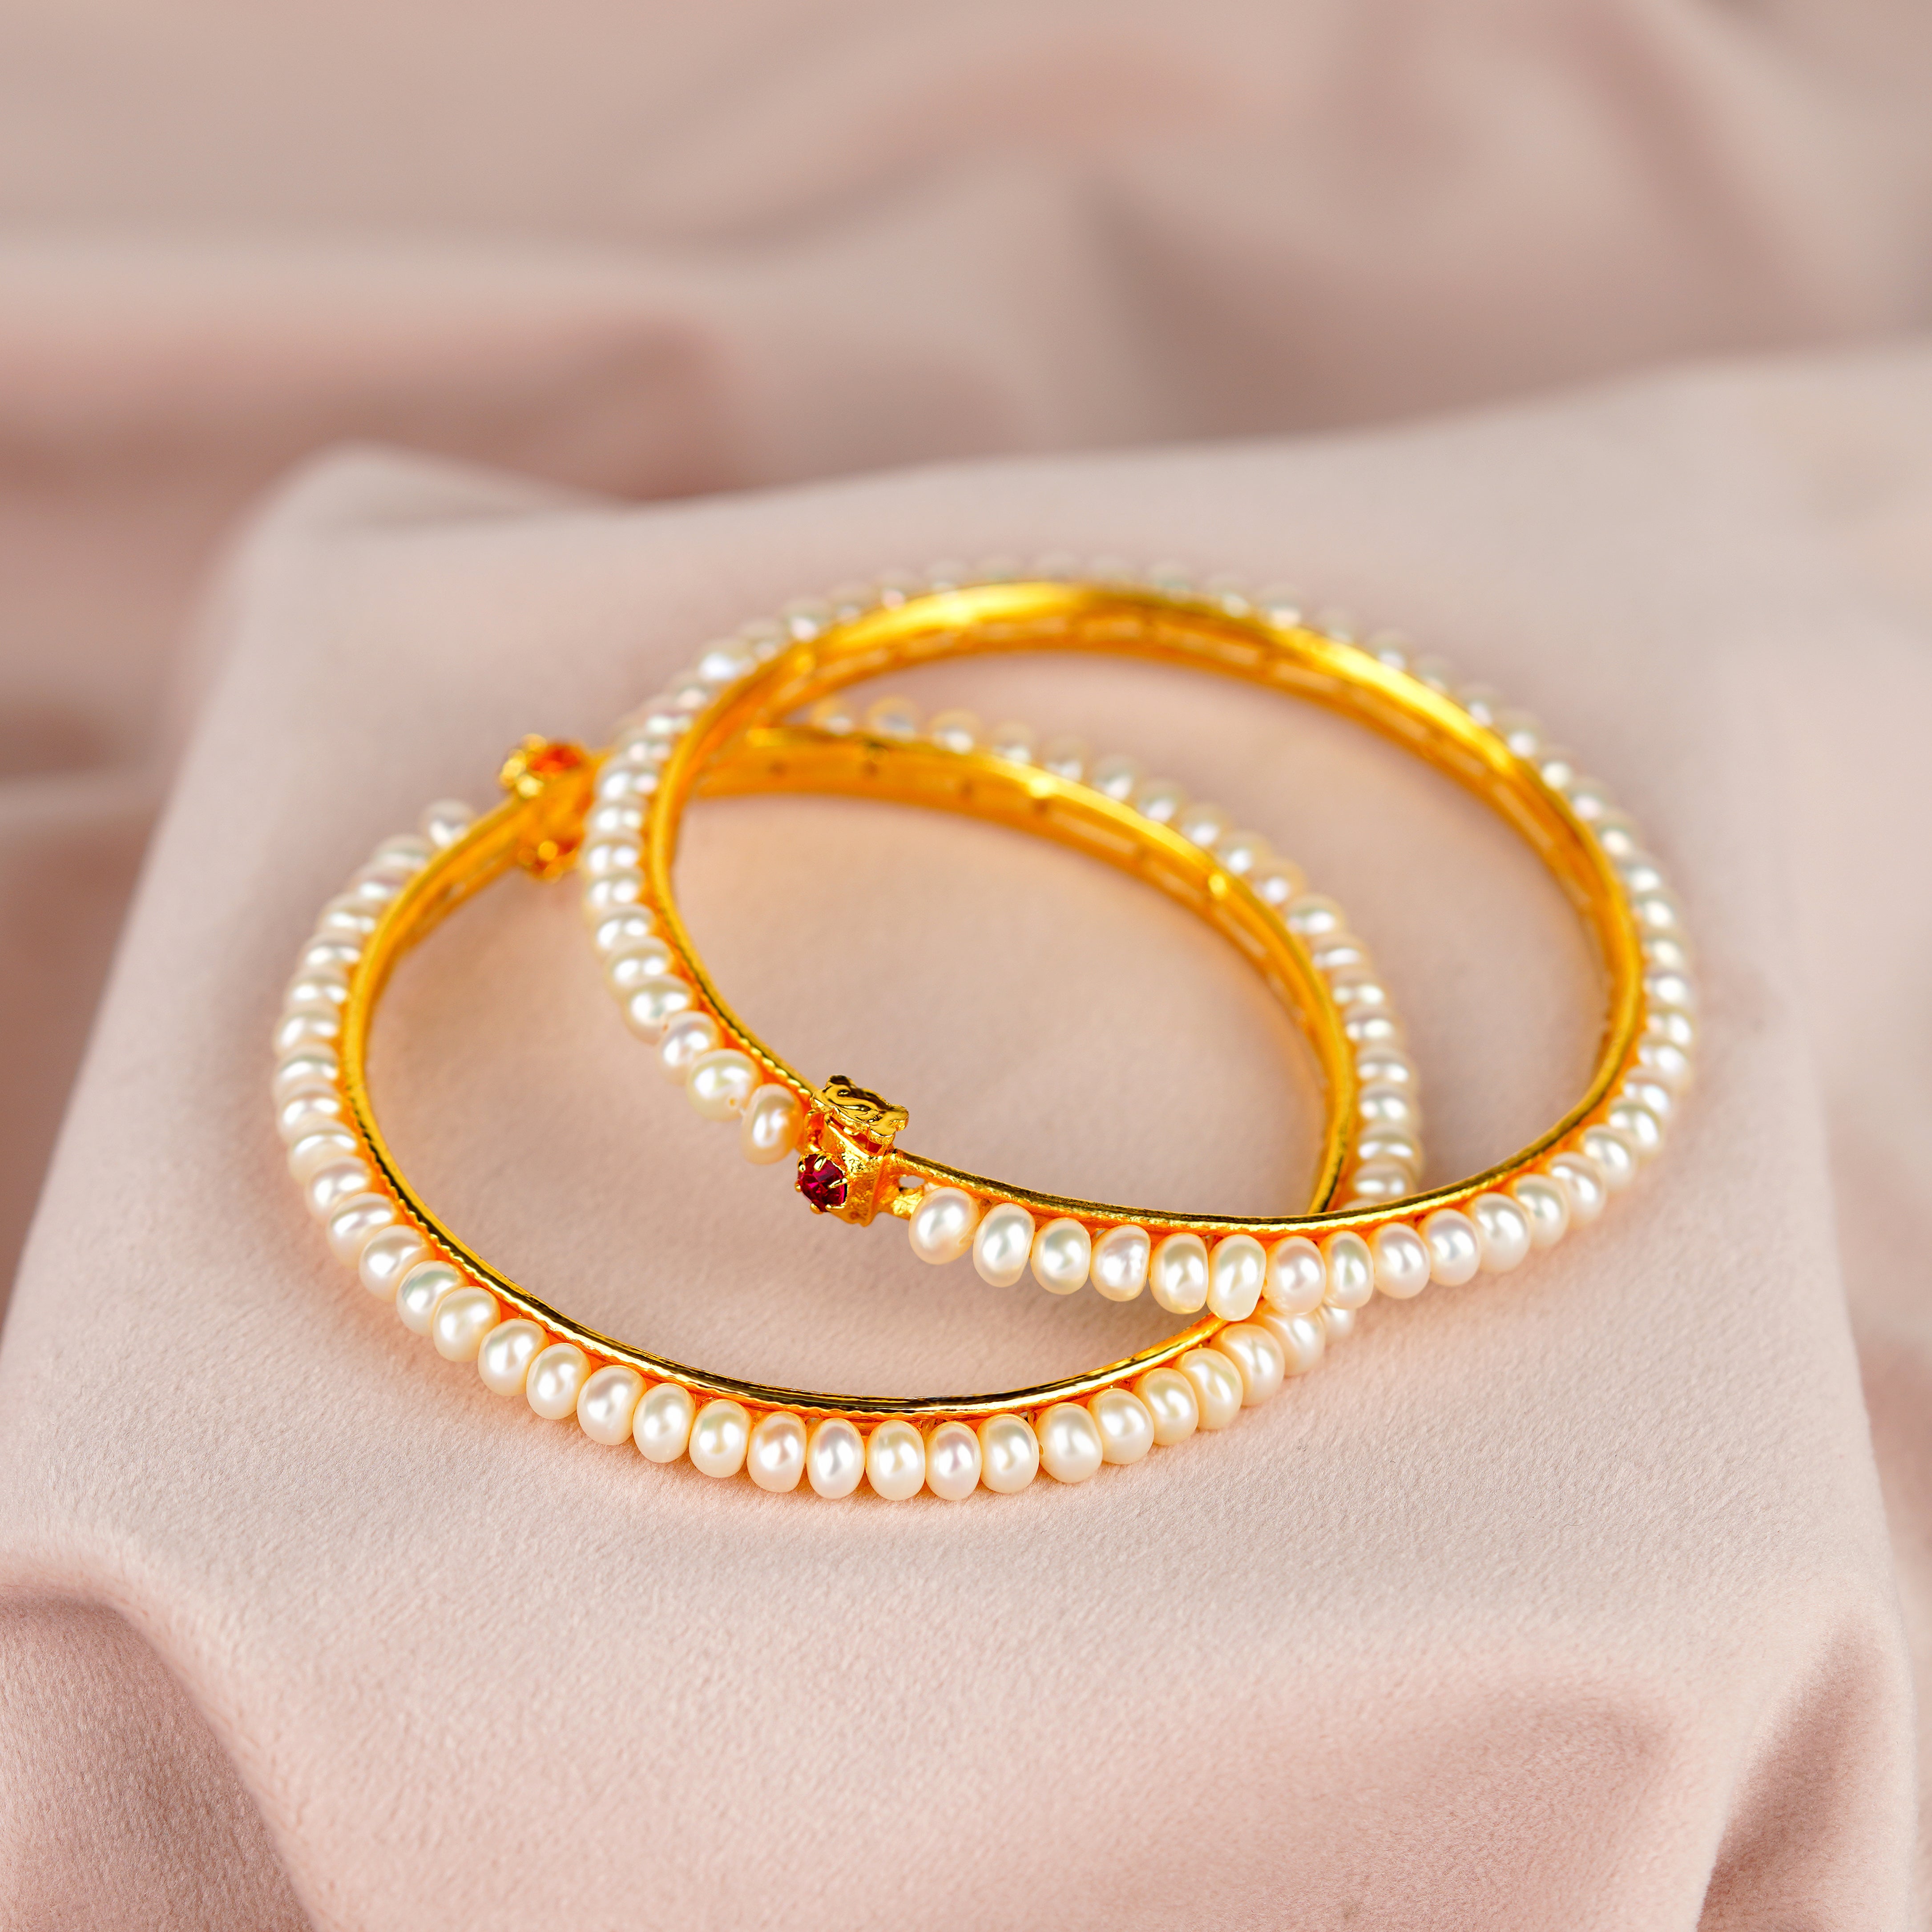 Elegant White Pearl Bangles with Sparkling Red Stones